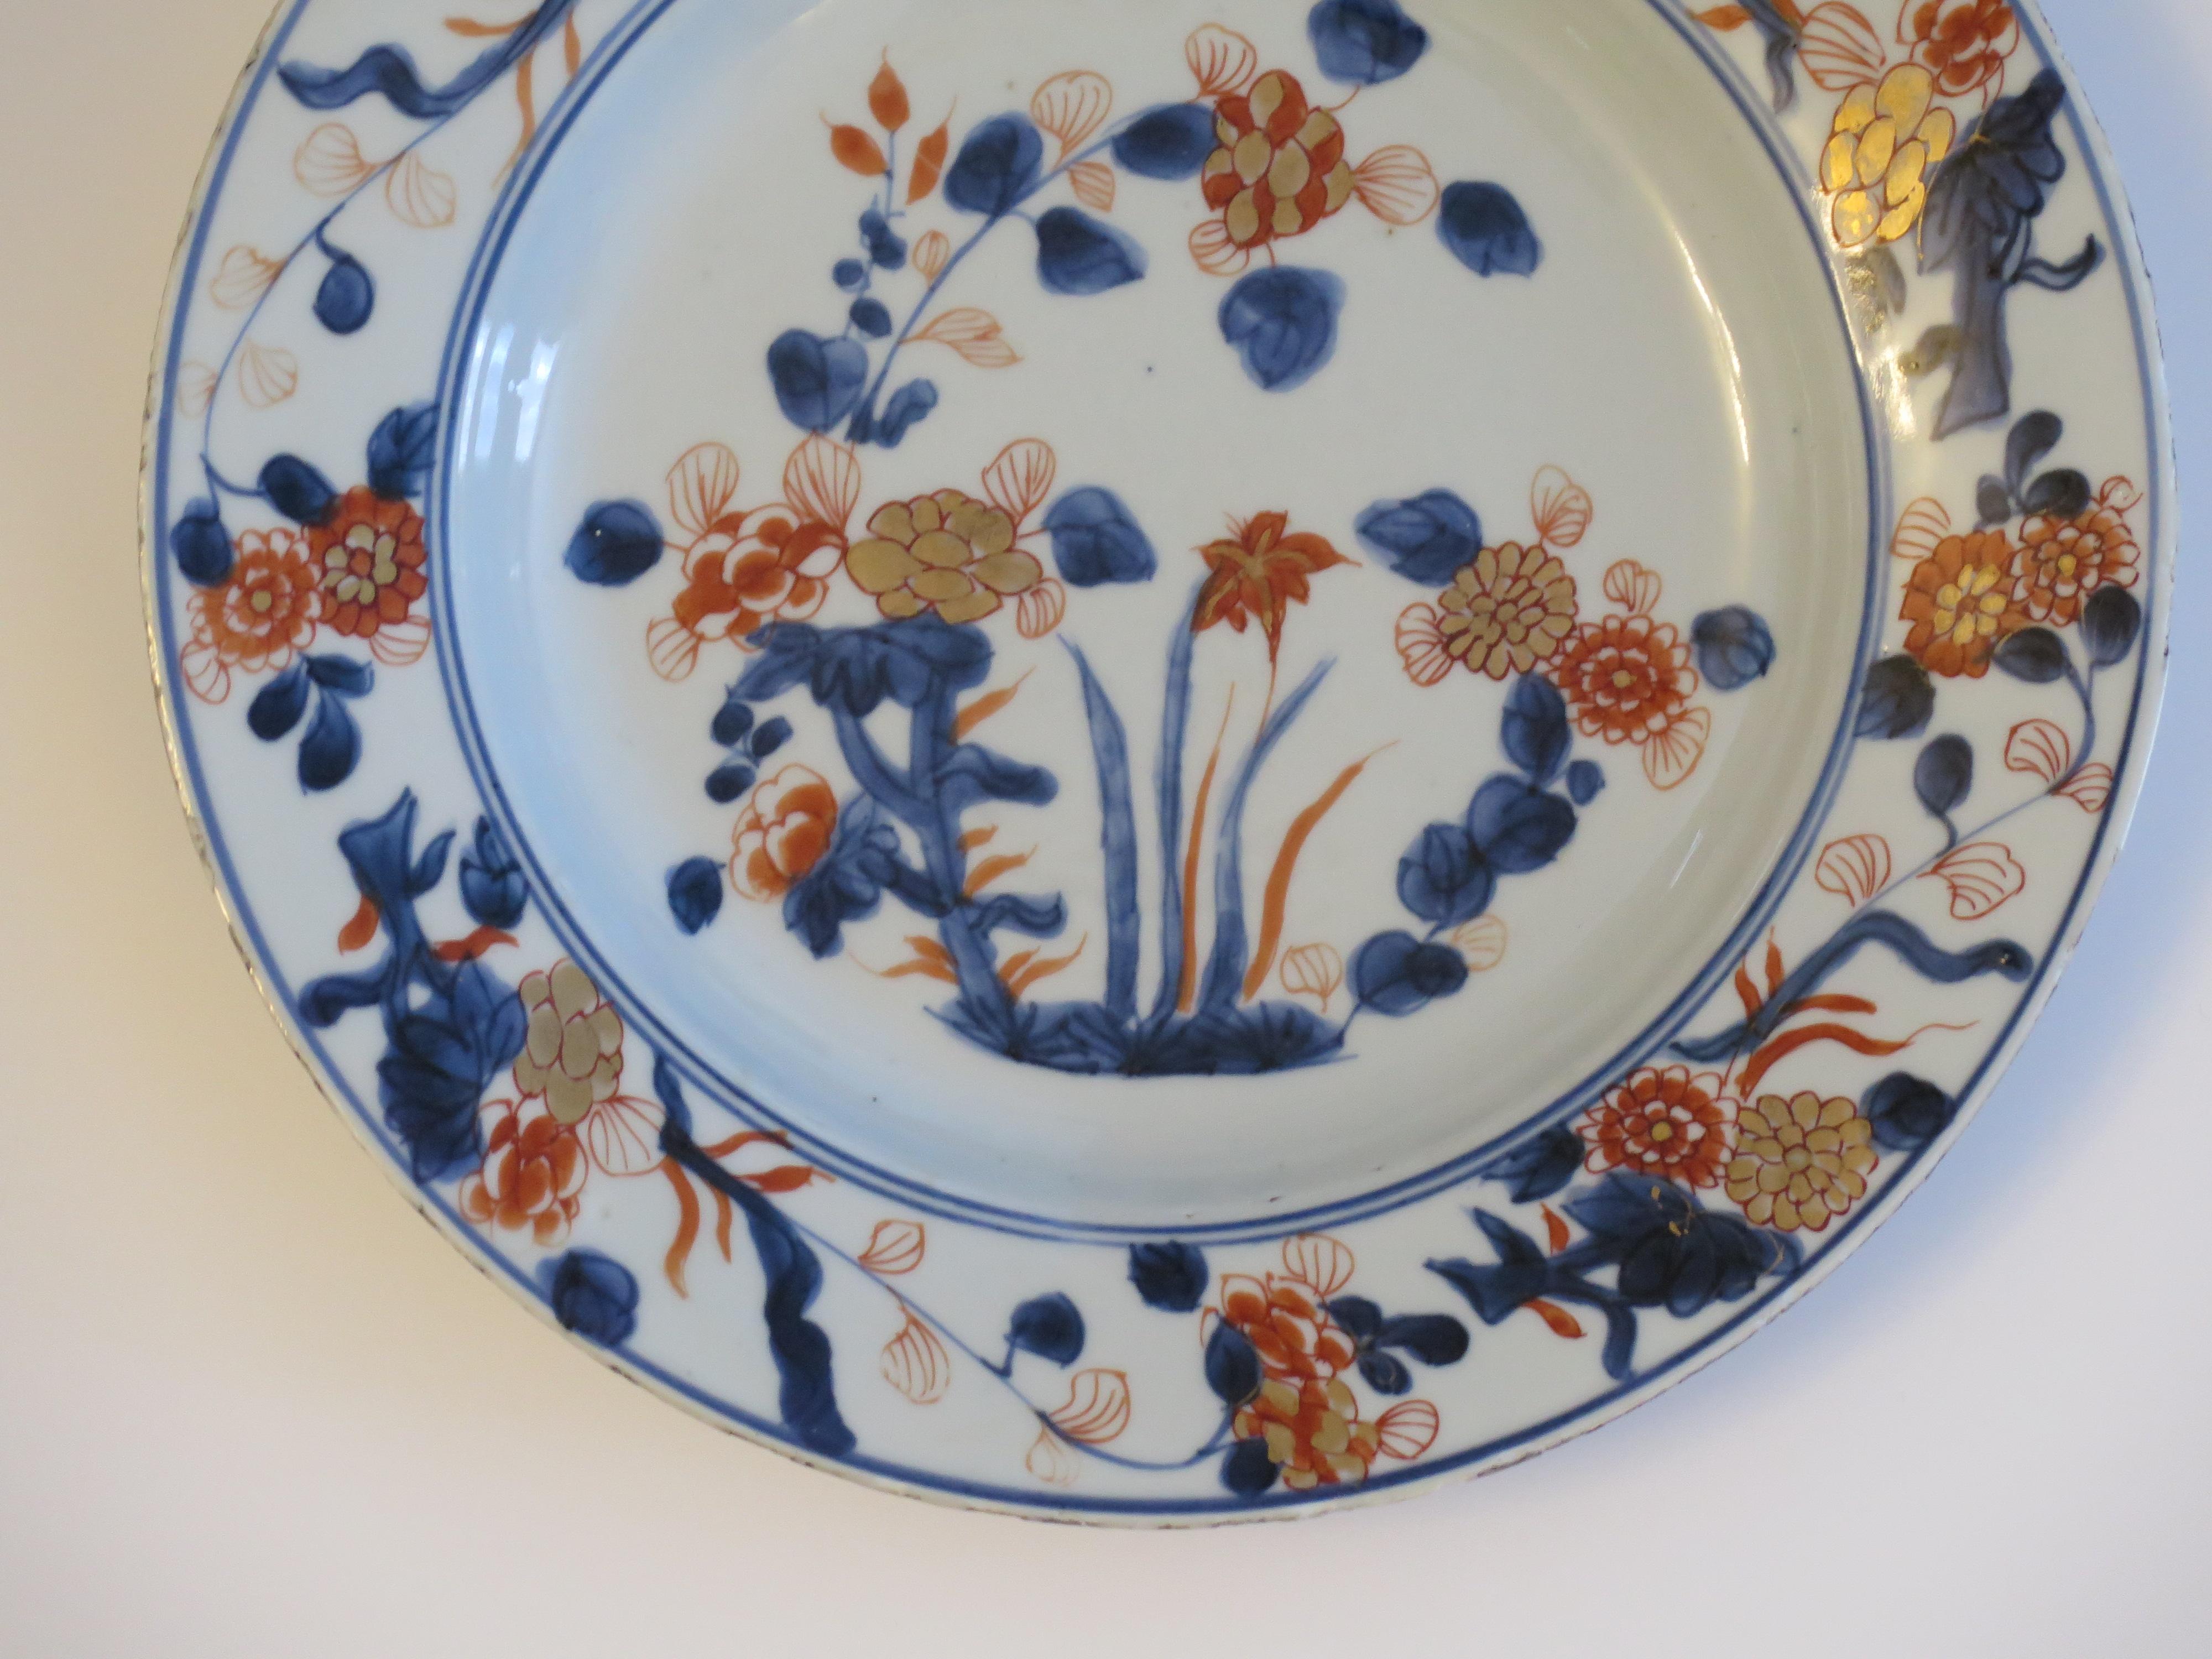 Chinese Export Chinese Porcelain Plate or Bowl Qing Kangxi Mark and Period, Ca 1700 For Sale